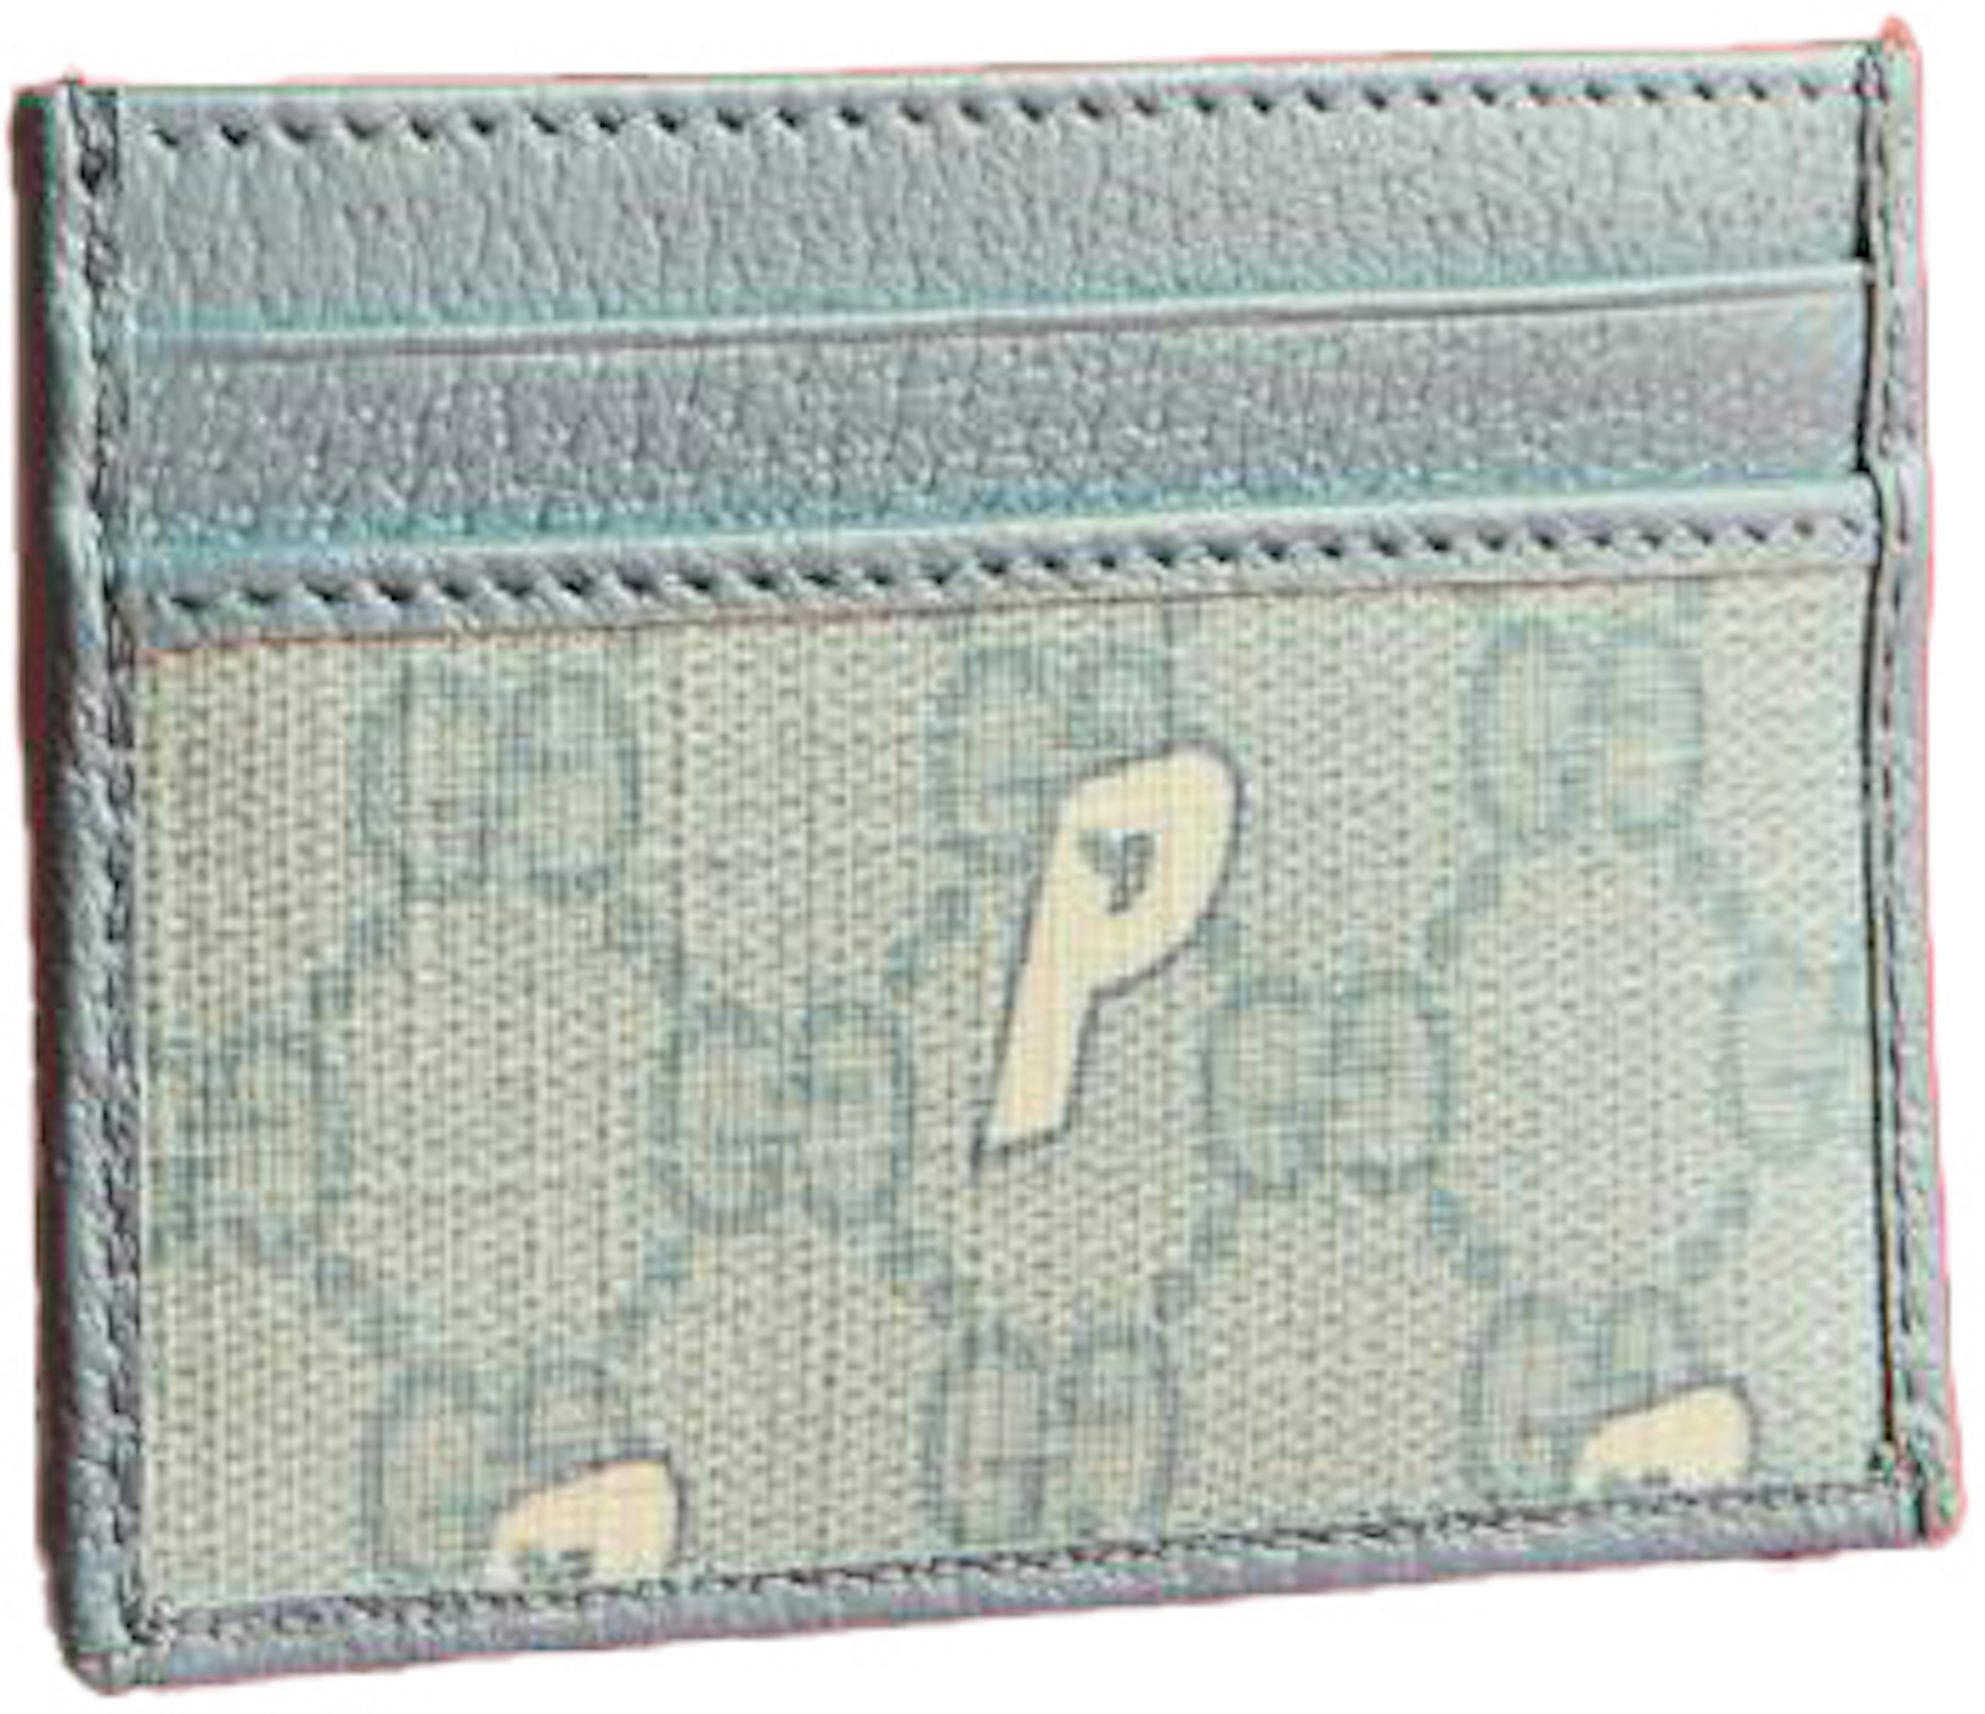 Ophidia GG Leather Card Holder in Blue - Gucci